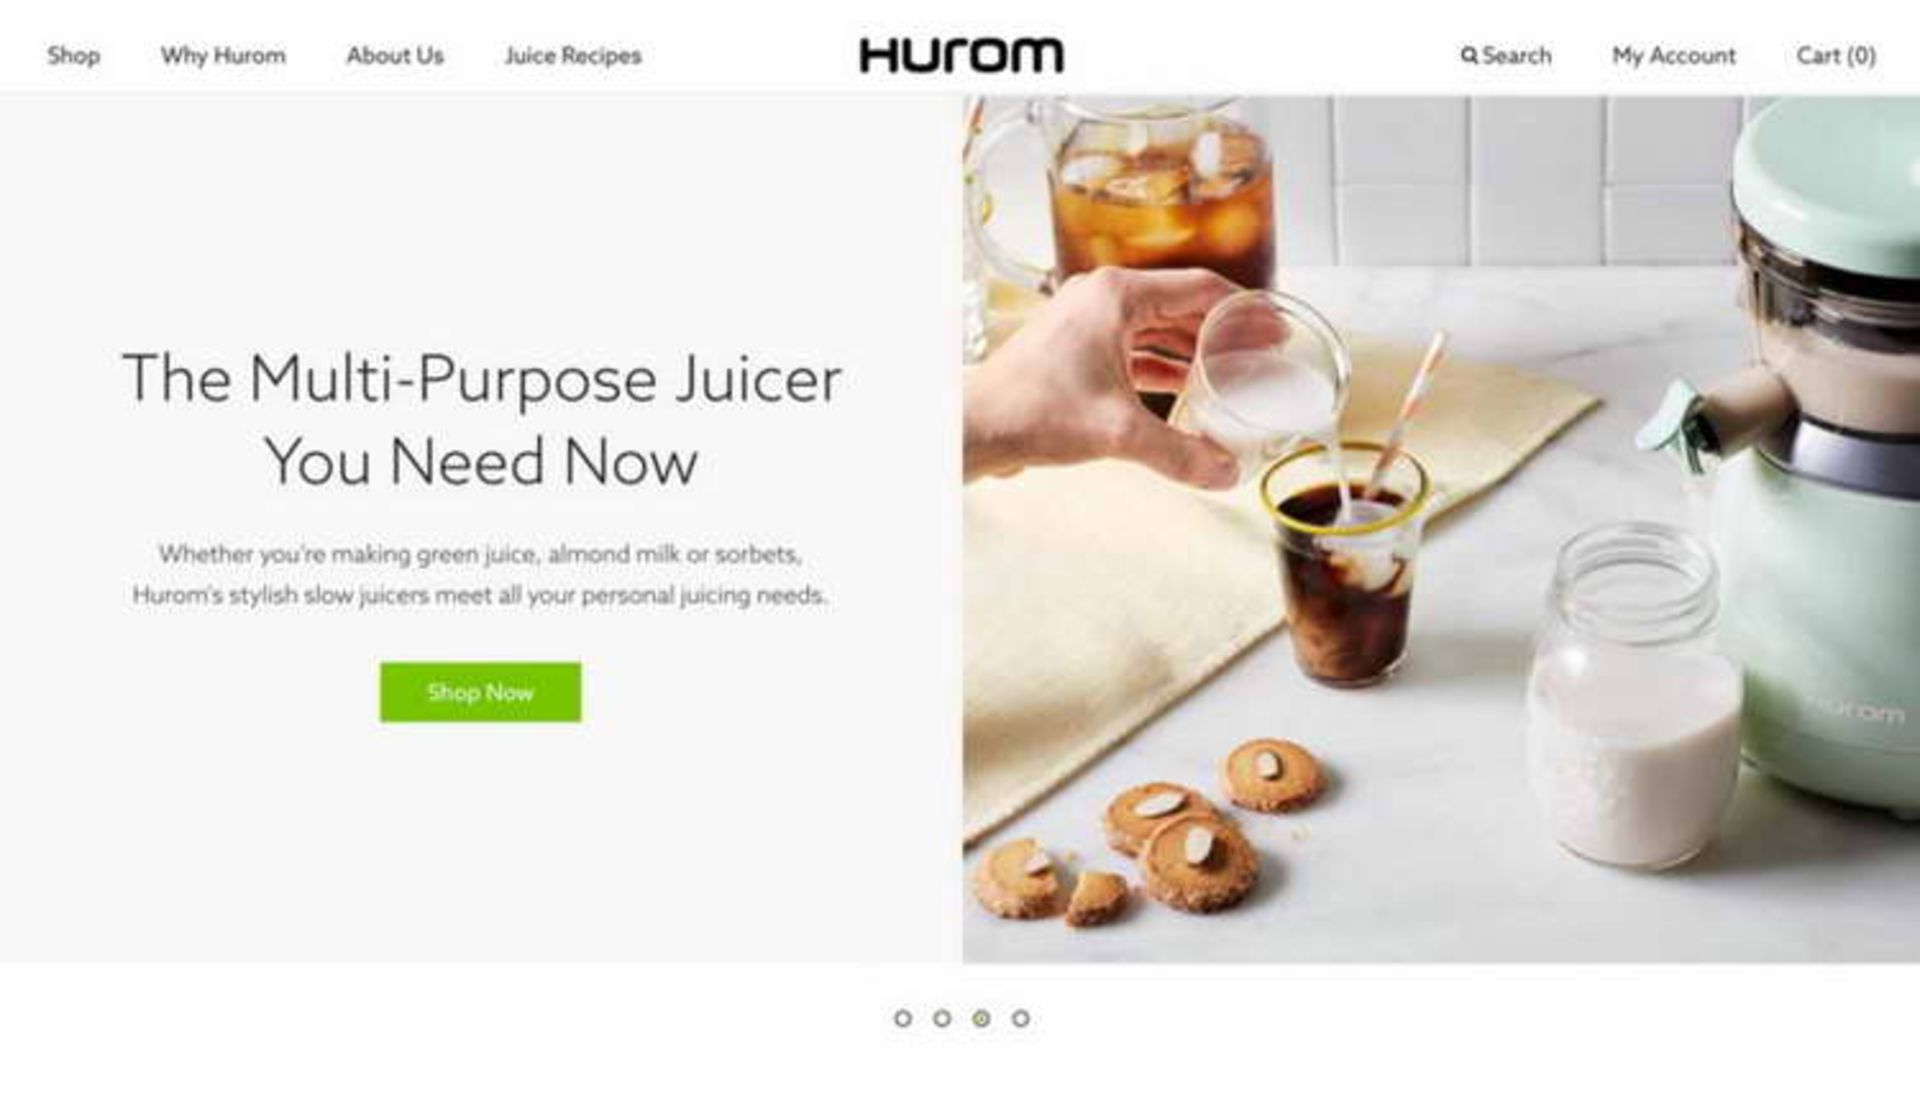 Hurom navigation and UI elements